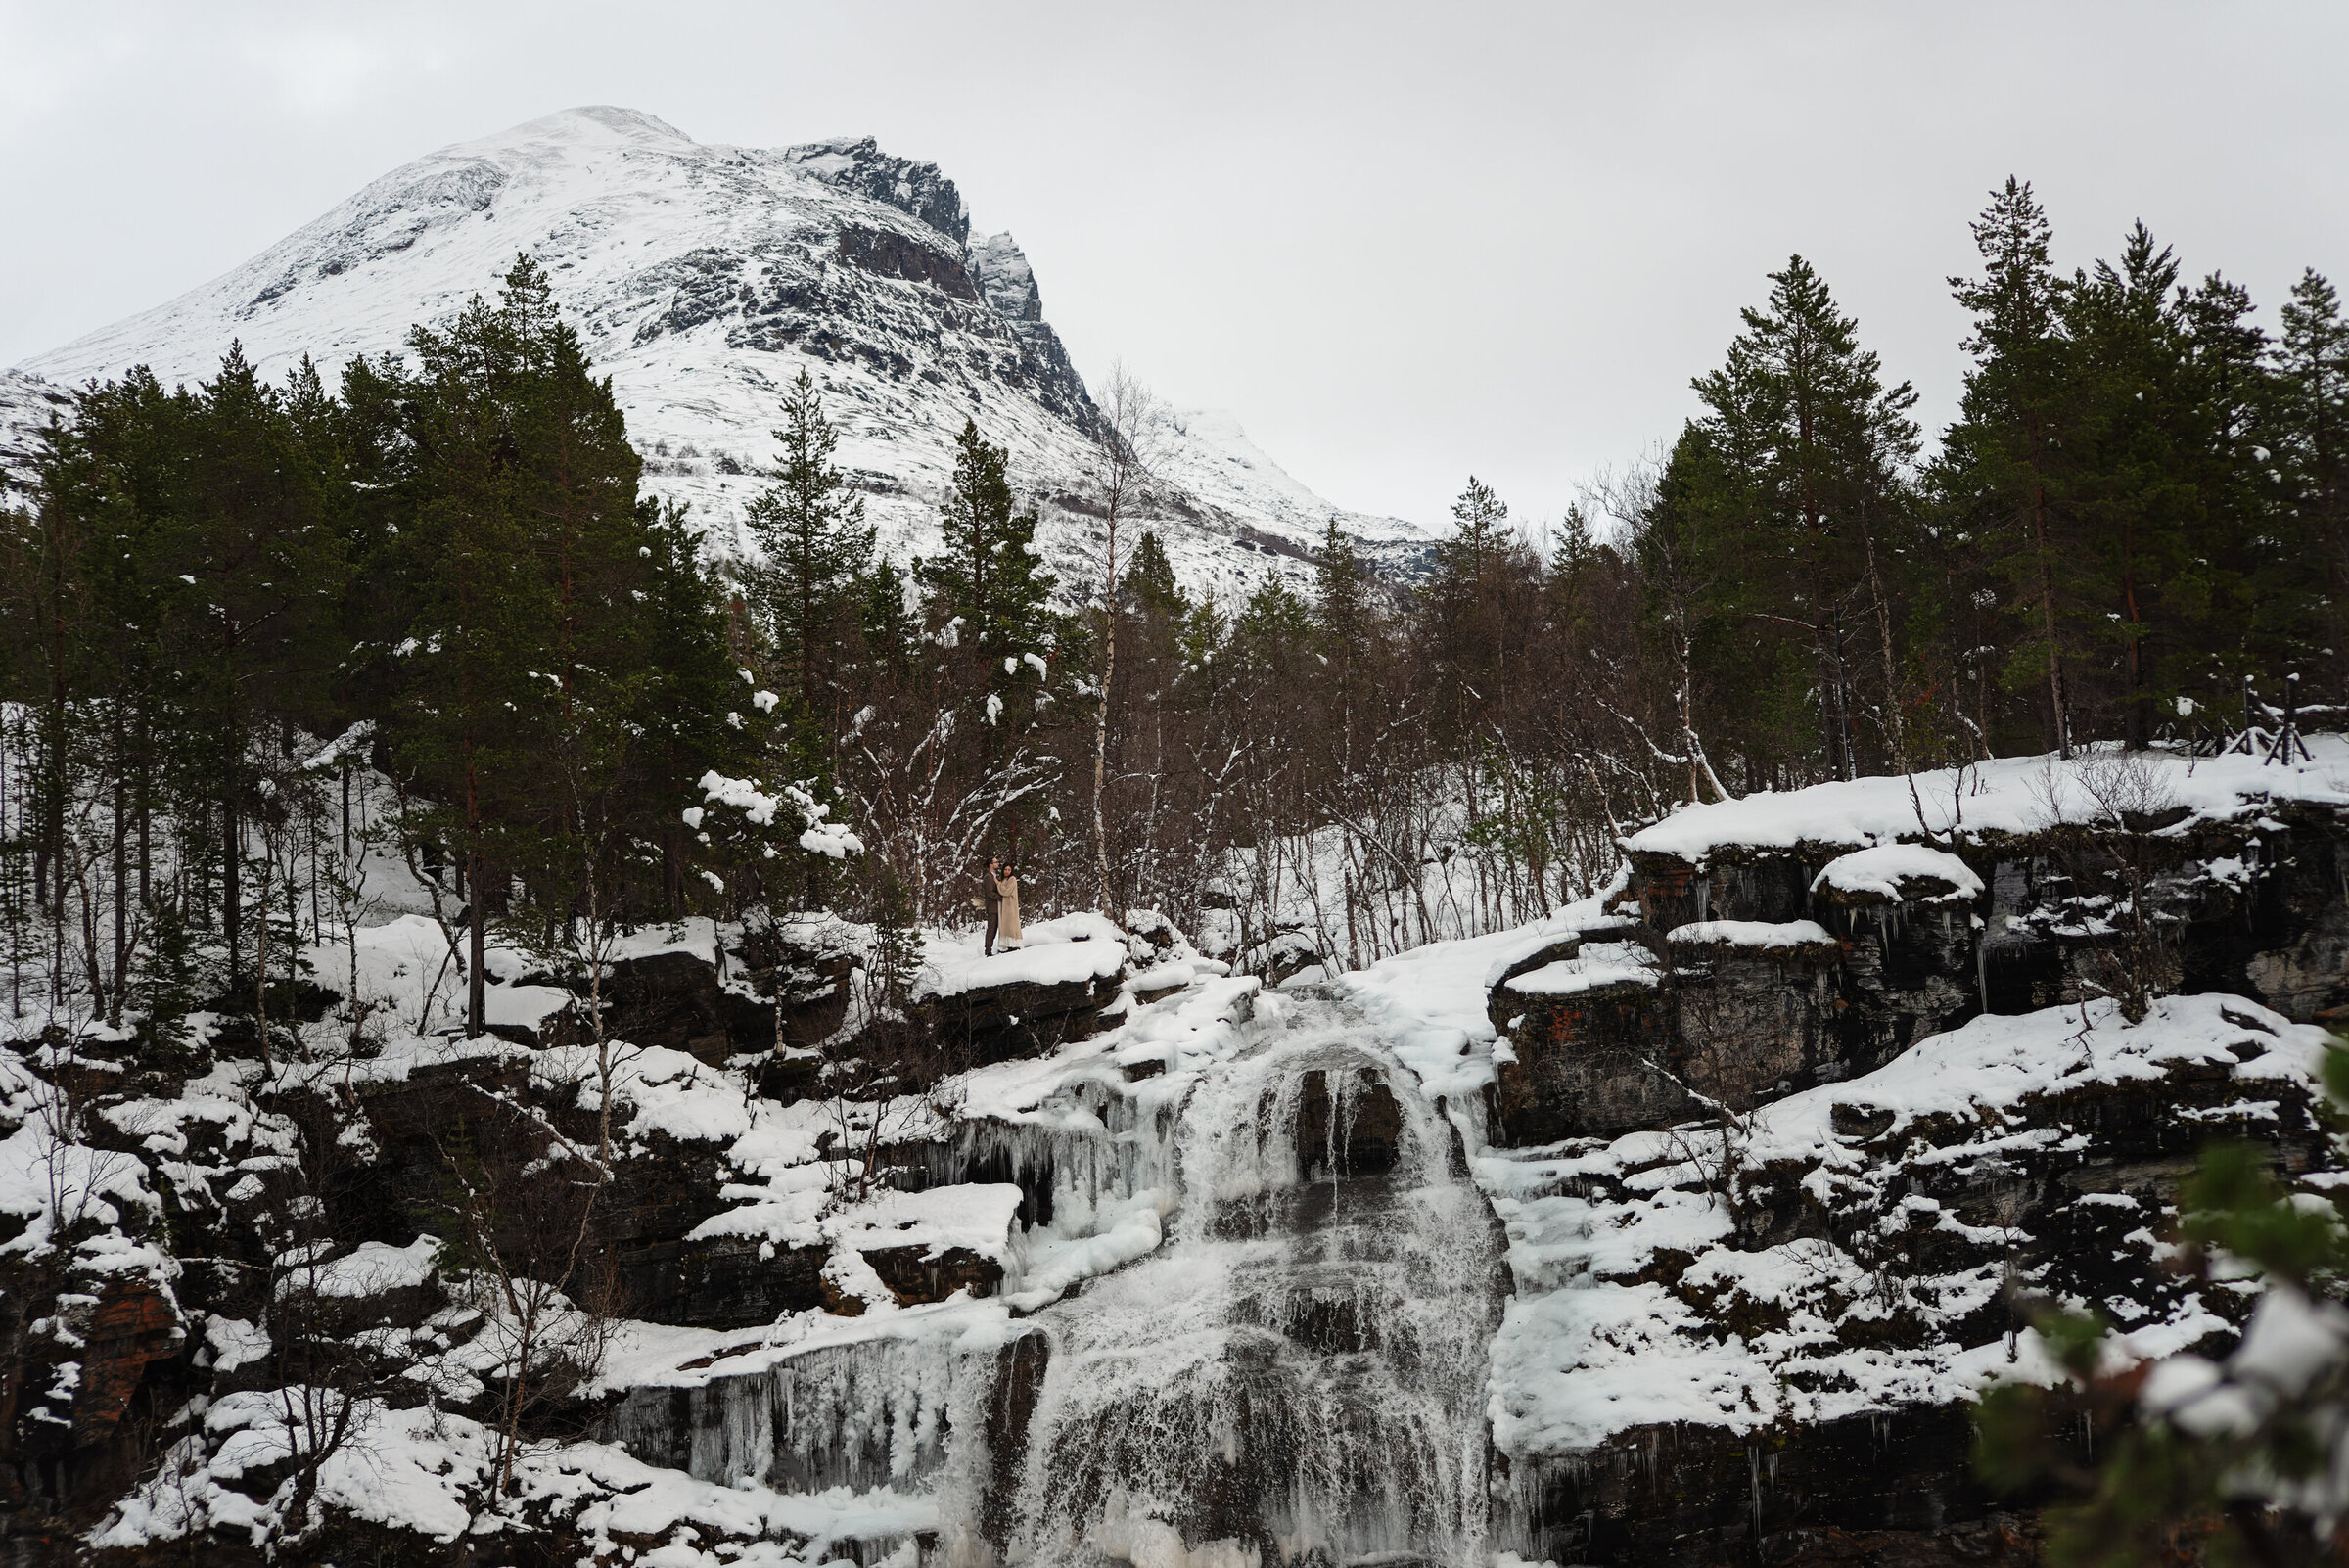 In the serene landscape of Norway, a couple stands at the top of a partially frozen waterfall. The grandeur of the mountain looms in the background, draped in snow, complementing the intimate moment that marks their elopement, with the wild beauty of nature as their witness.